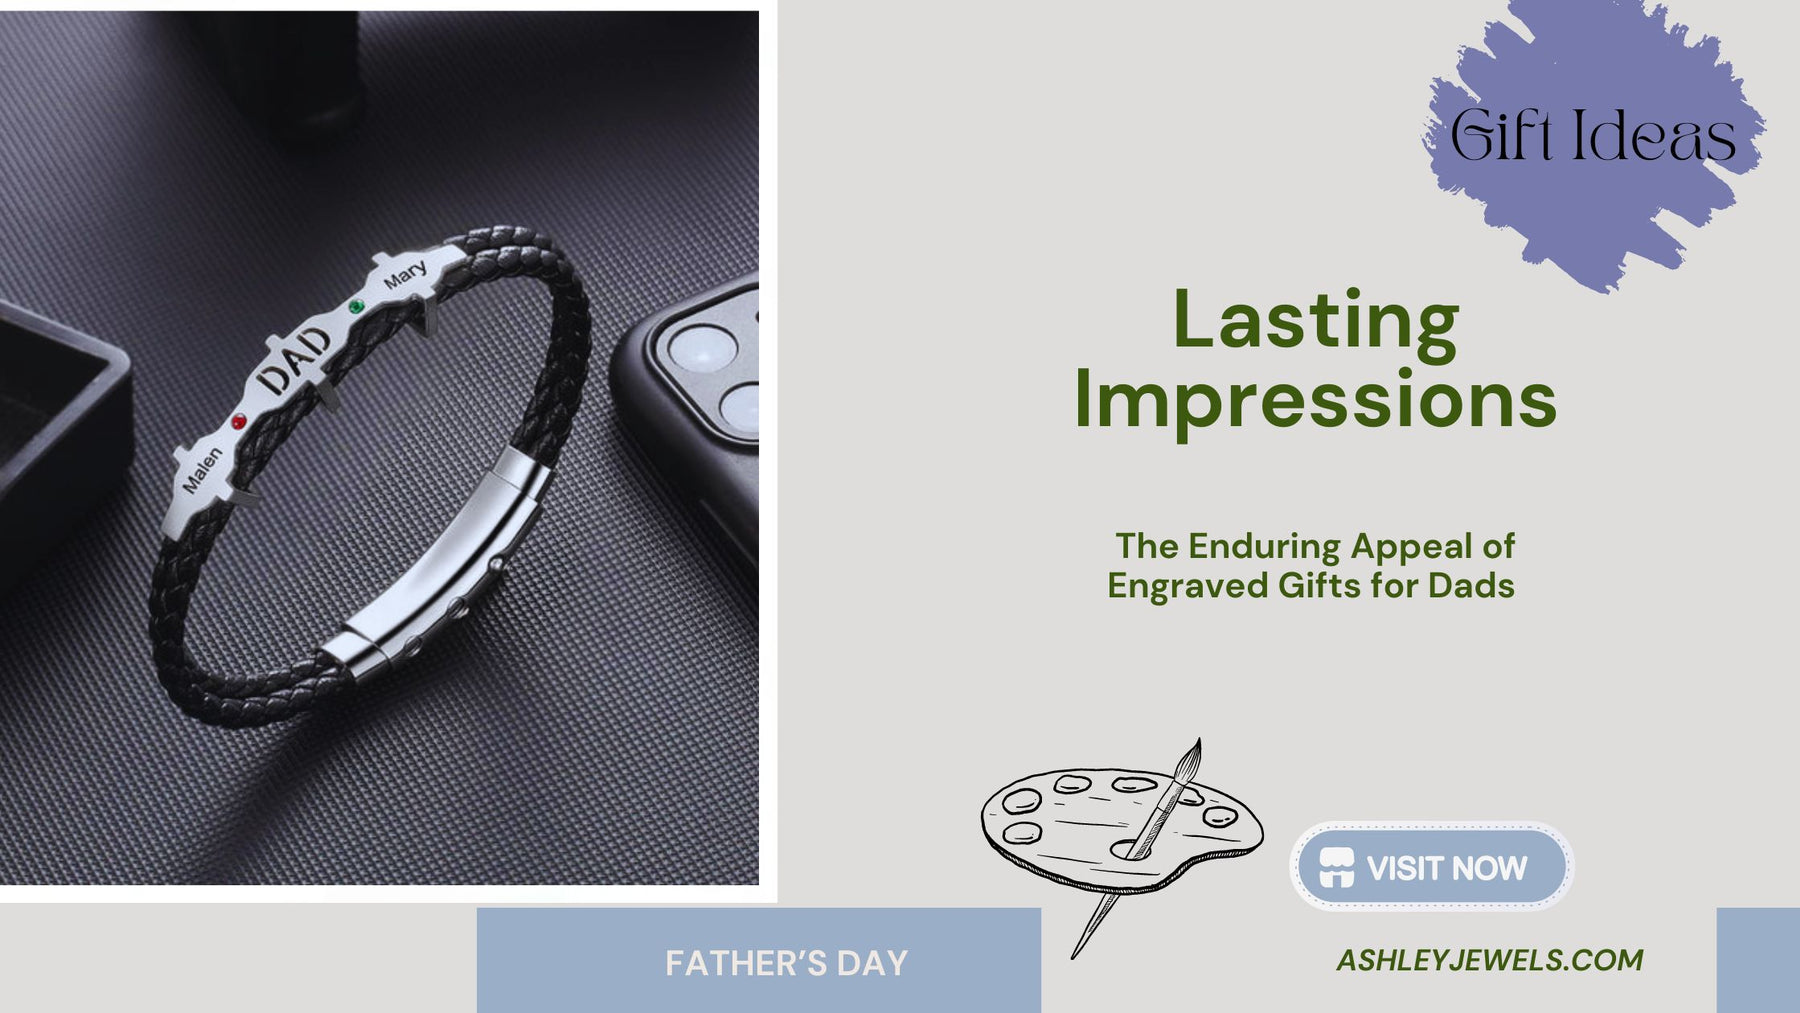 Lasting Impressions: The Enduring Appeal of Engraved Gifts for Dads